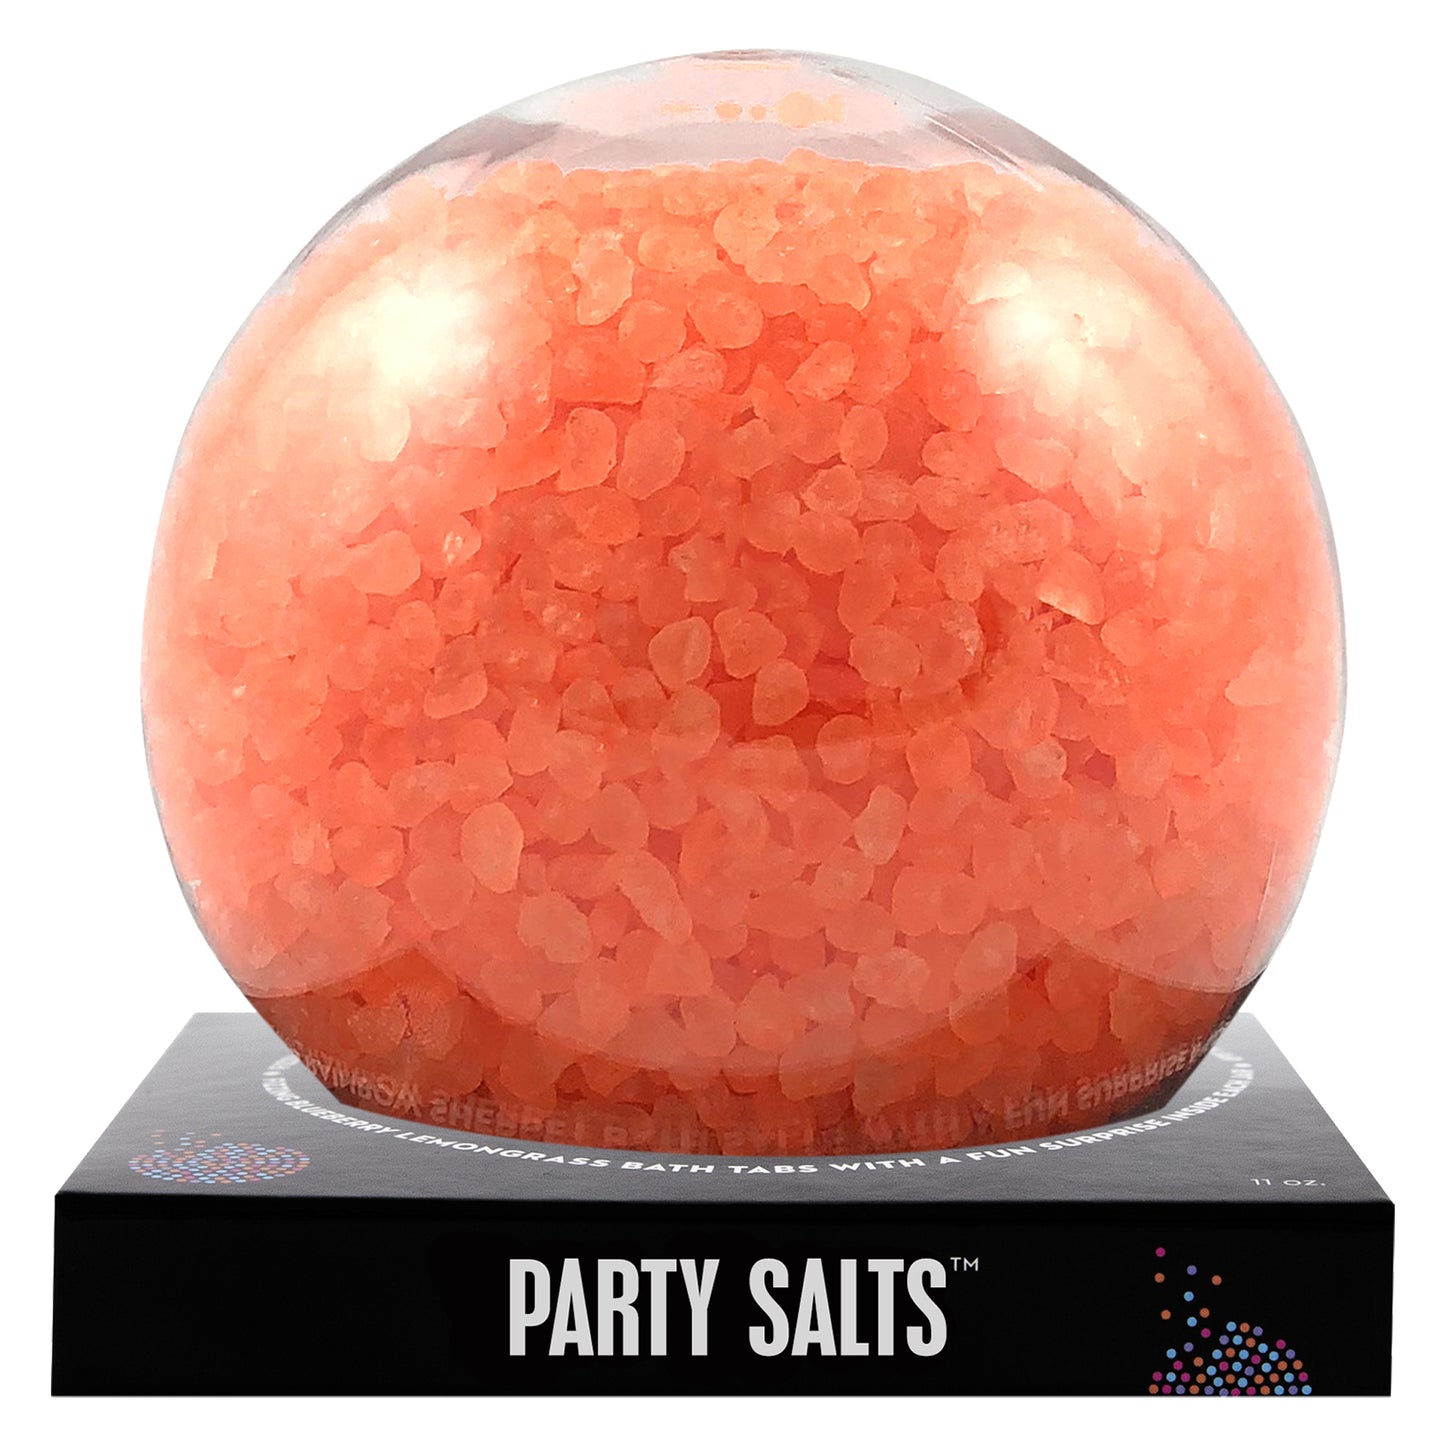 Orange Party Salts with a surprise inside, scented as pineapple.